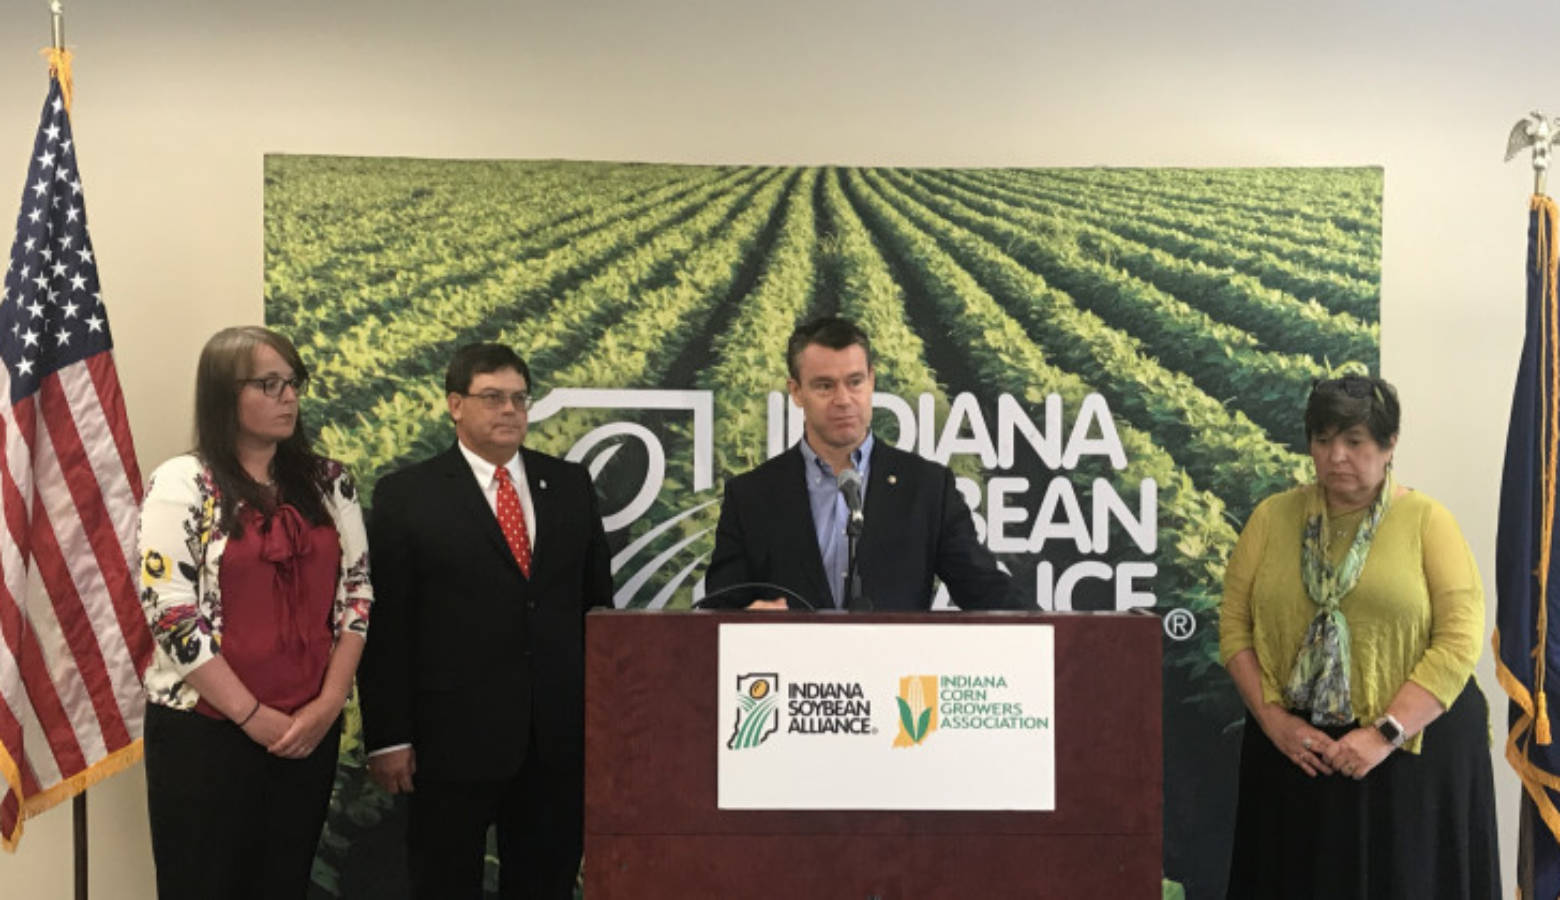 From left to right: Sarah Delbecq, president of the Indiana Corn Growers Association; Phil Ramsey, chairman of the Soybean Membership and Policy Committee; Sen. Todd Young; and Jane Ade Stevens, CEO of the Indiana Corn Marketing Council.